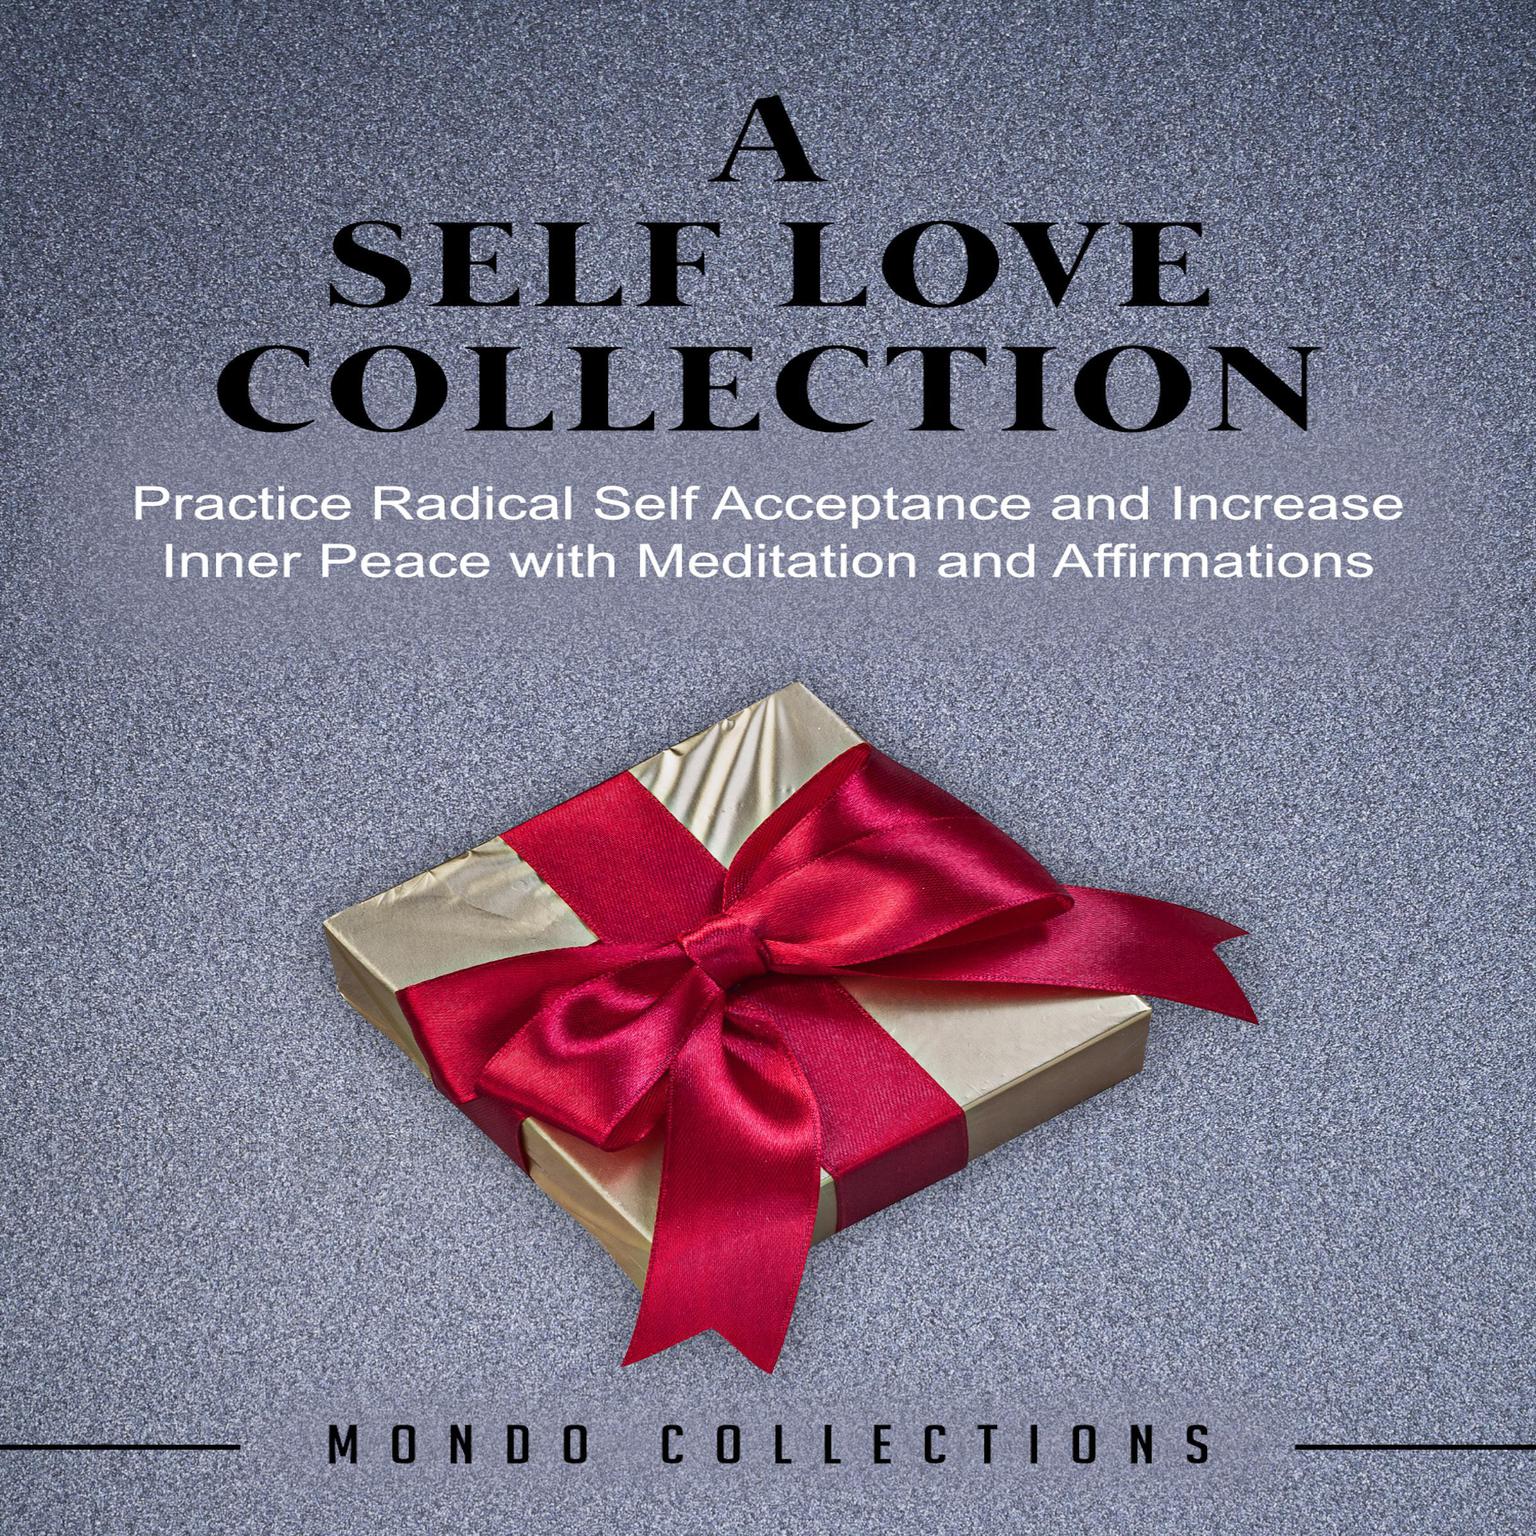 A Self Love Collection: : Practice Radical Self Acceptance and Increase Inner Peace with Meditation and Affirmations Audiobook, by Mondo Collections